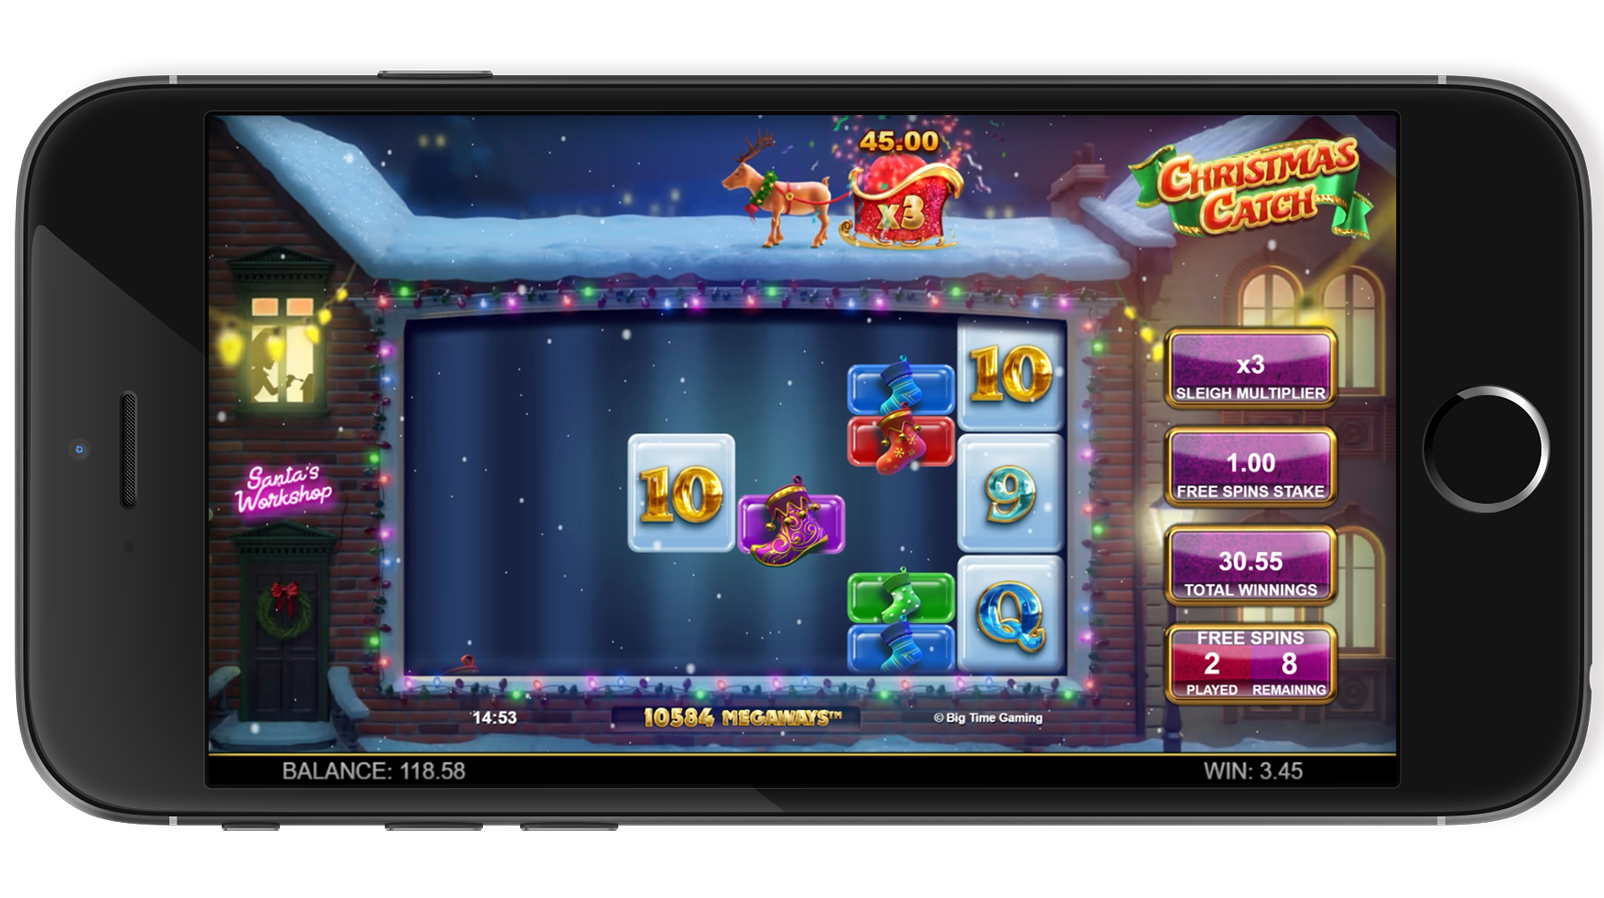 ChristmasCatch_FreeSpins_6_mobile.png